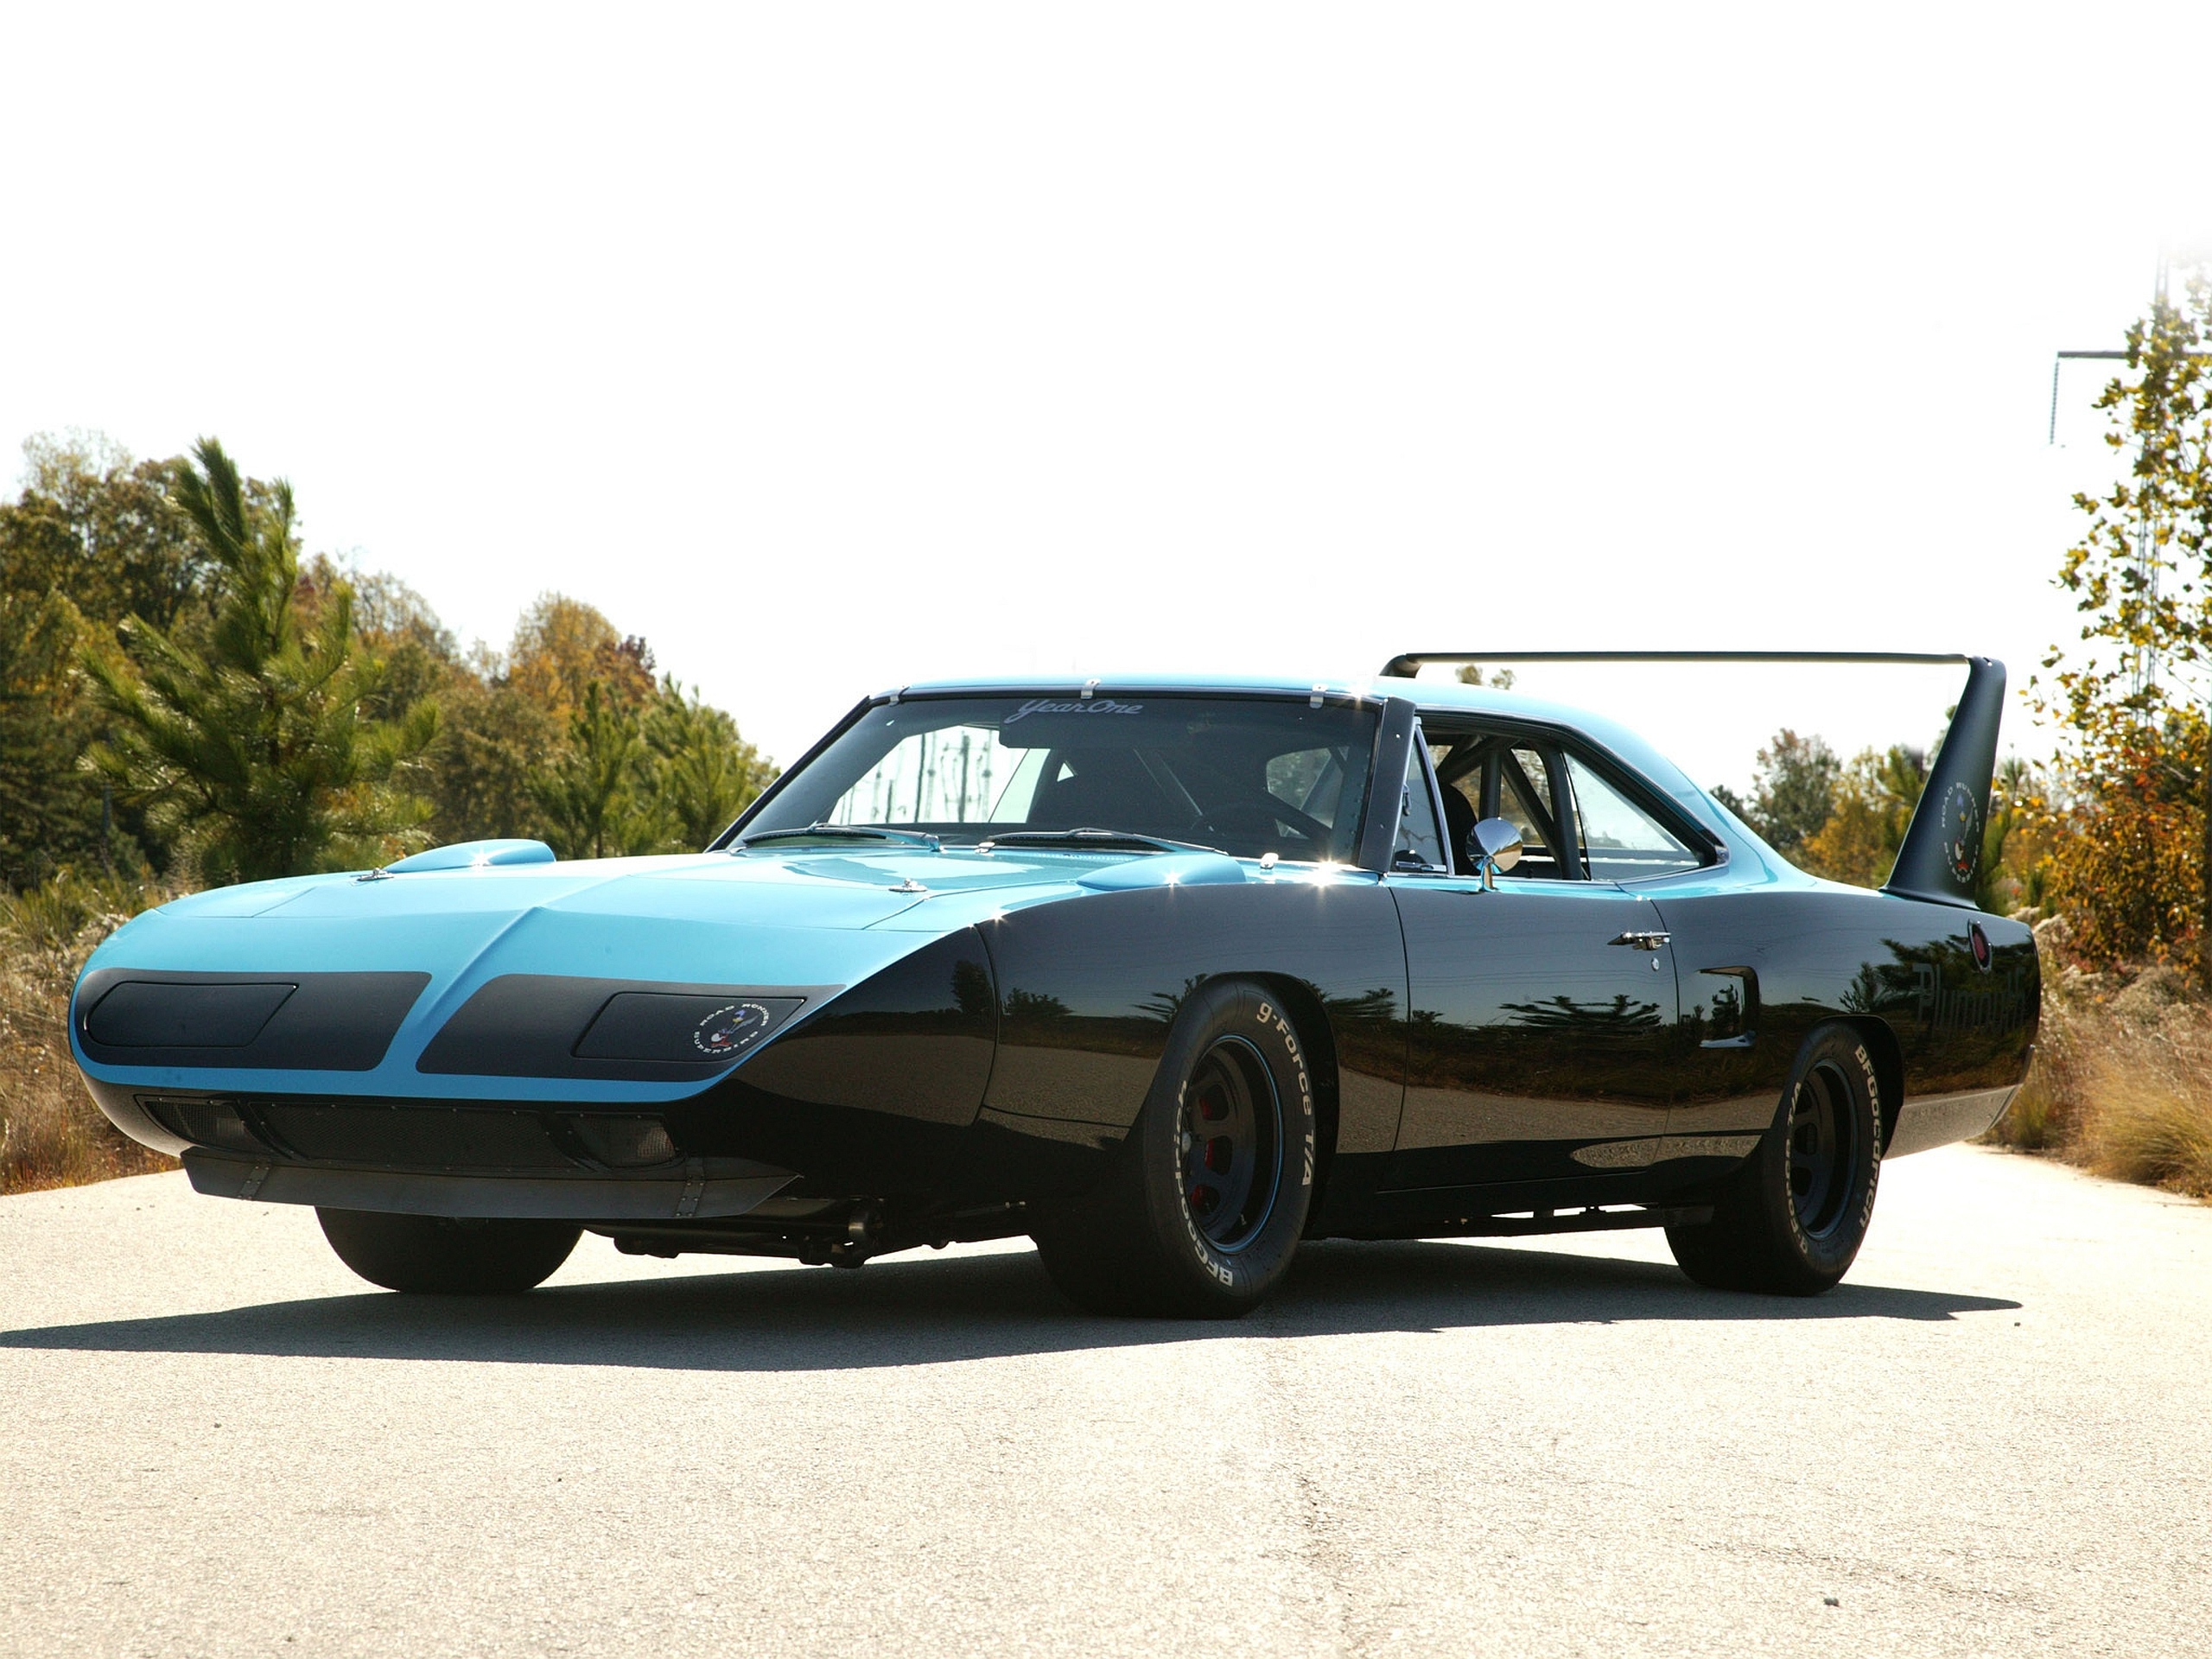 vehicles, 1970 plymouth superbird, plymouth